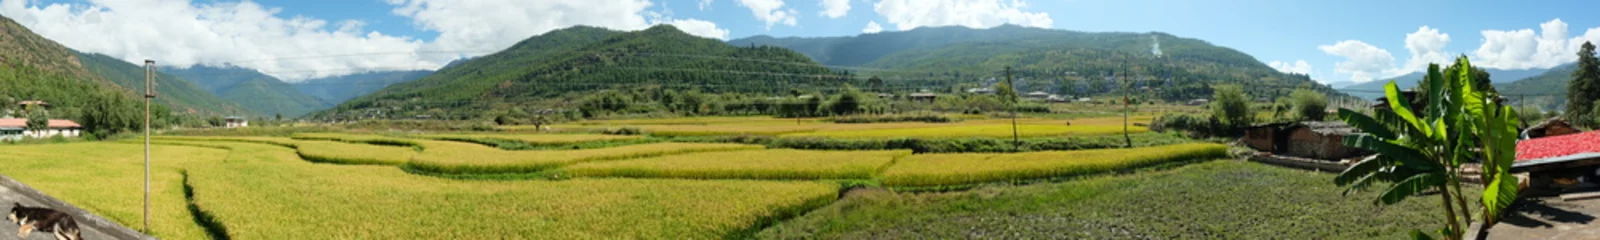  Panoramic landscape of rice terrace, mountains and a backyard in Paro, Bhutan © Sharoh